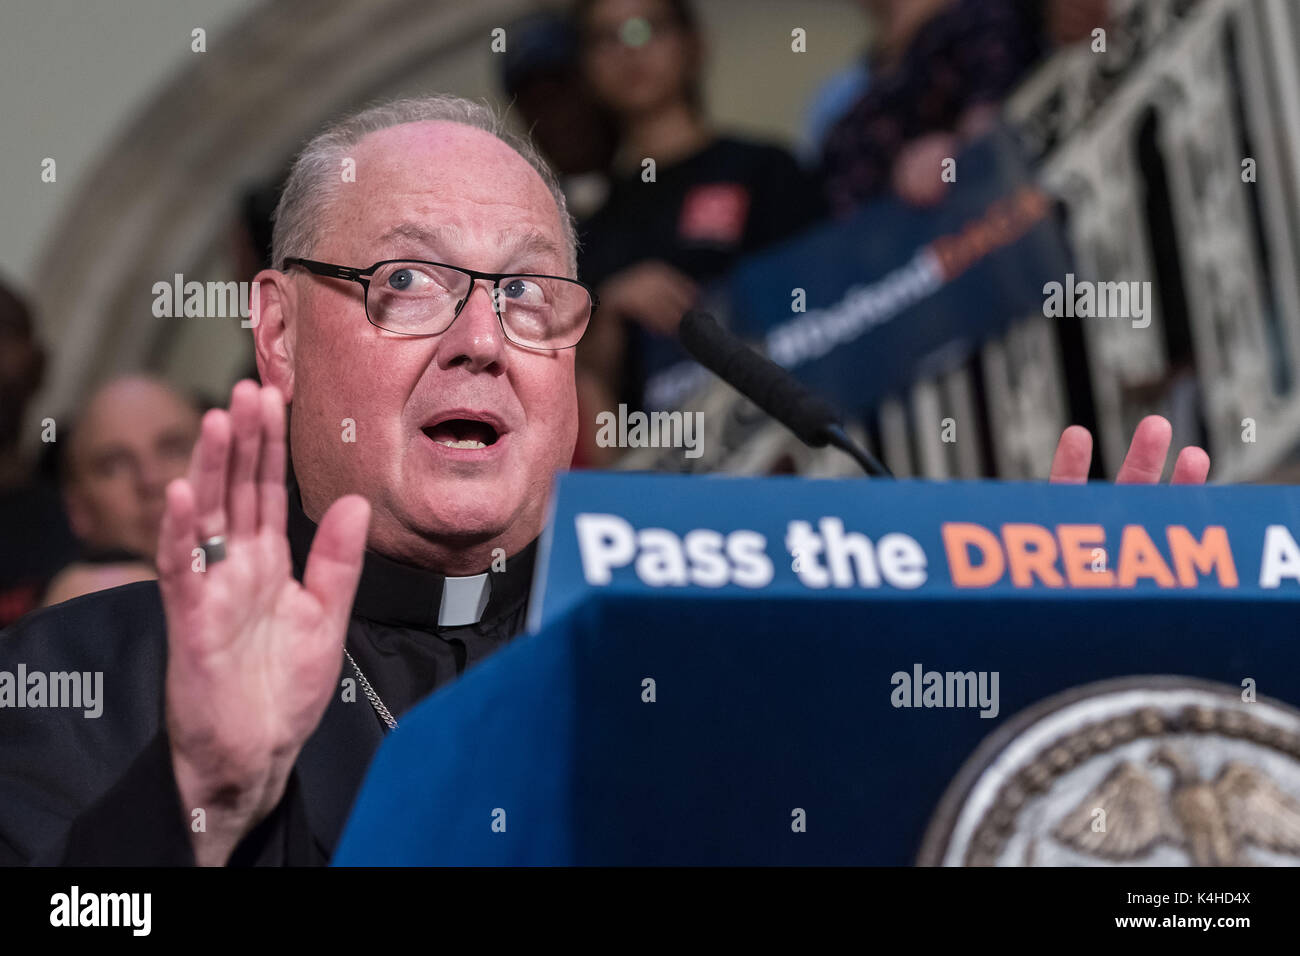 New York, United States. 05th Sep, 2017. Cardinal Timothy Dolan is seen in City Hall. Following President Donald J. Trump's decision to revoke the Obama-era 'Deferred Action for Childhood Arrivals' (DACA) policy, NYC Mayor, First Lady Chirlaine McCray, key elected City officials and clergy spoke at a rally inside City Hall's rotunda. Credit: PACIFIC PRESS/Alamy Live News Stock Photo